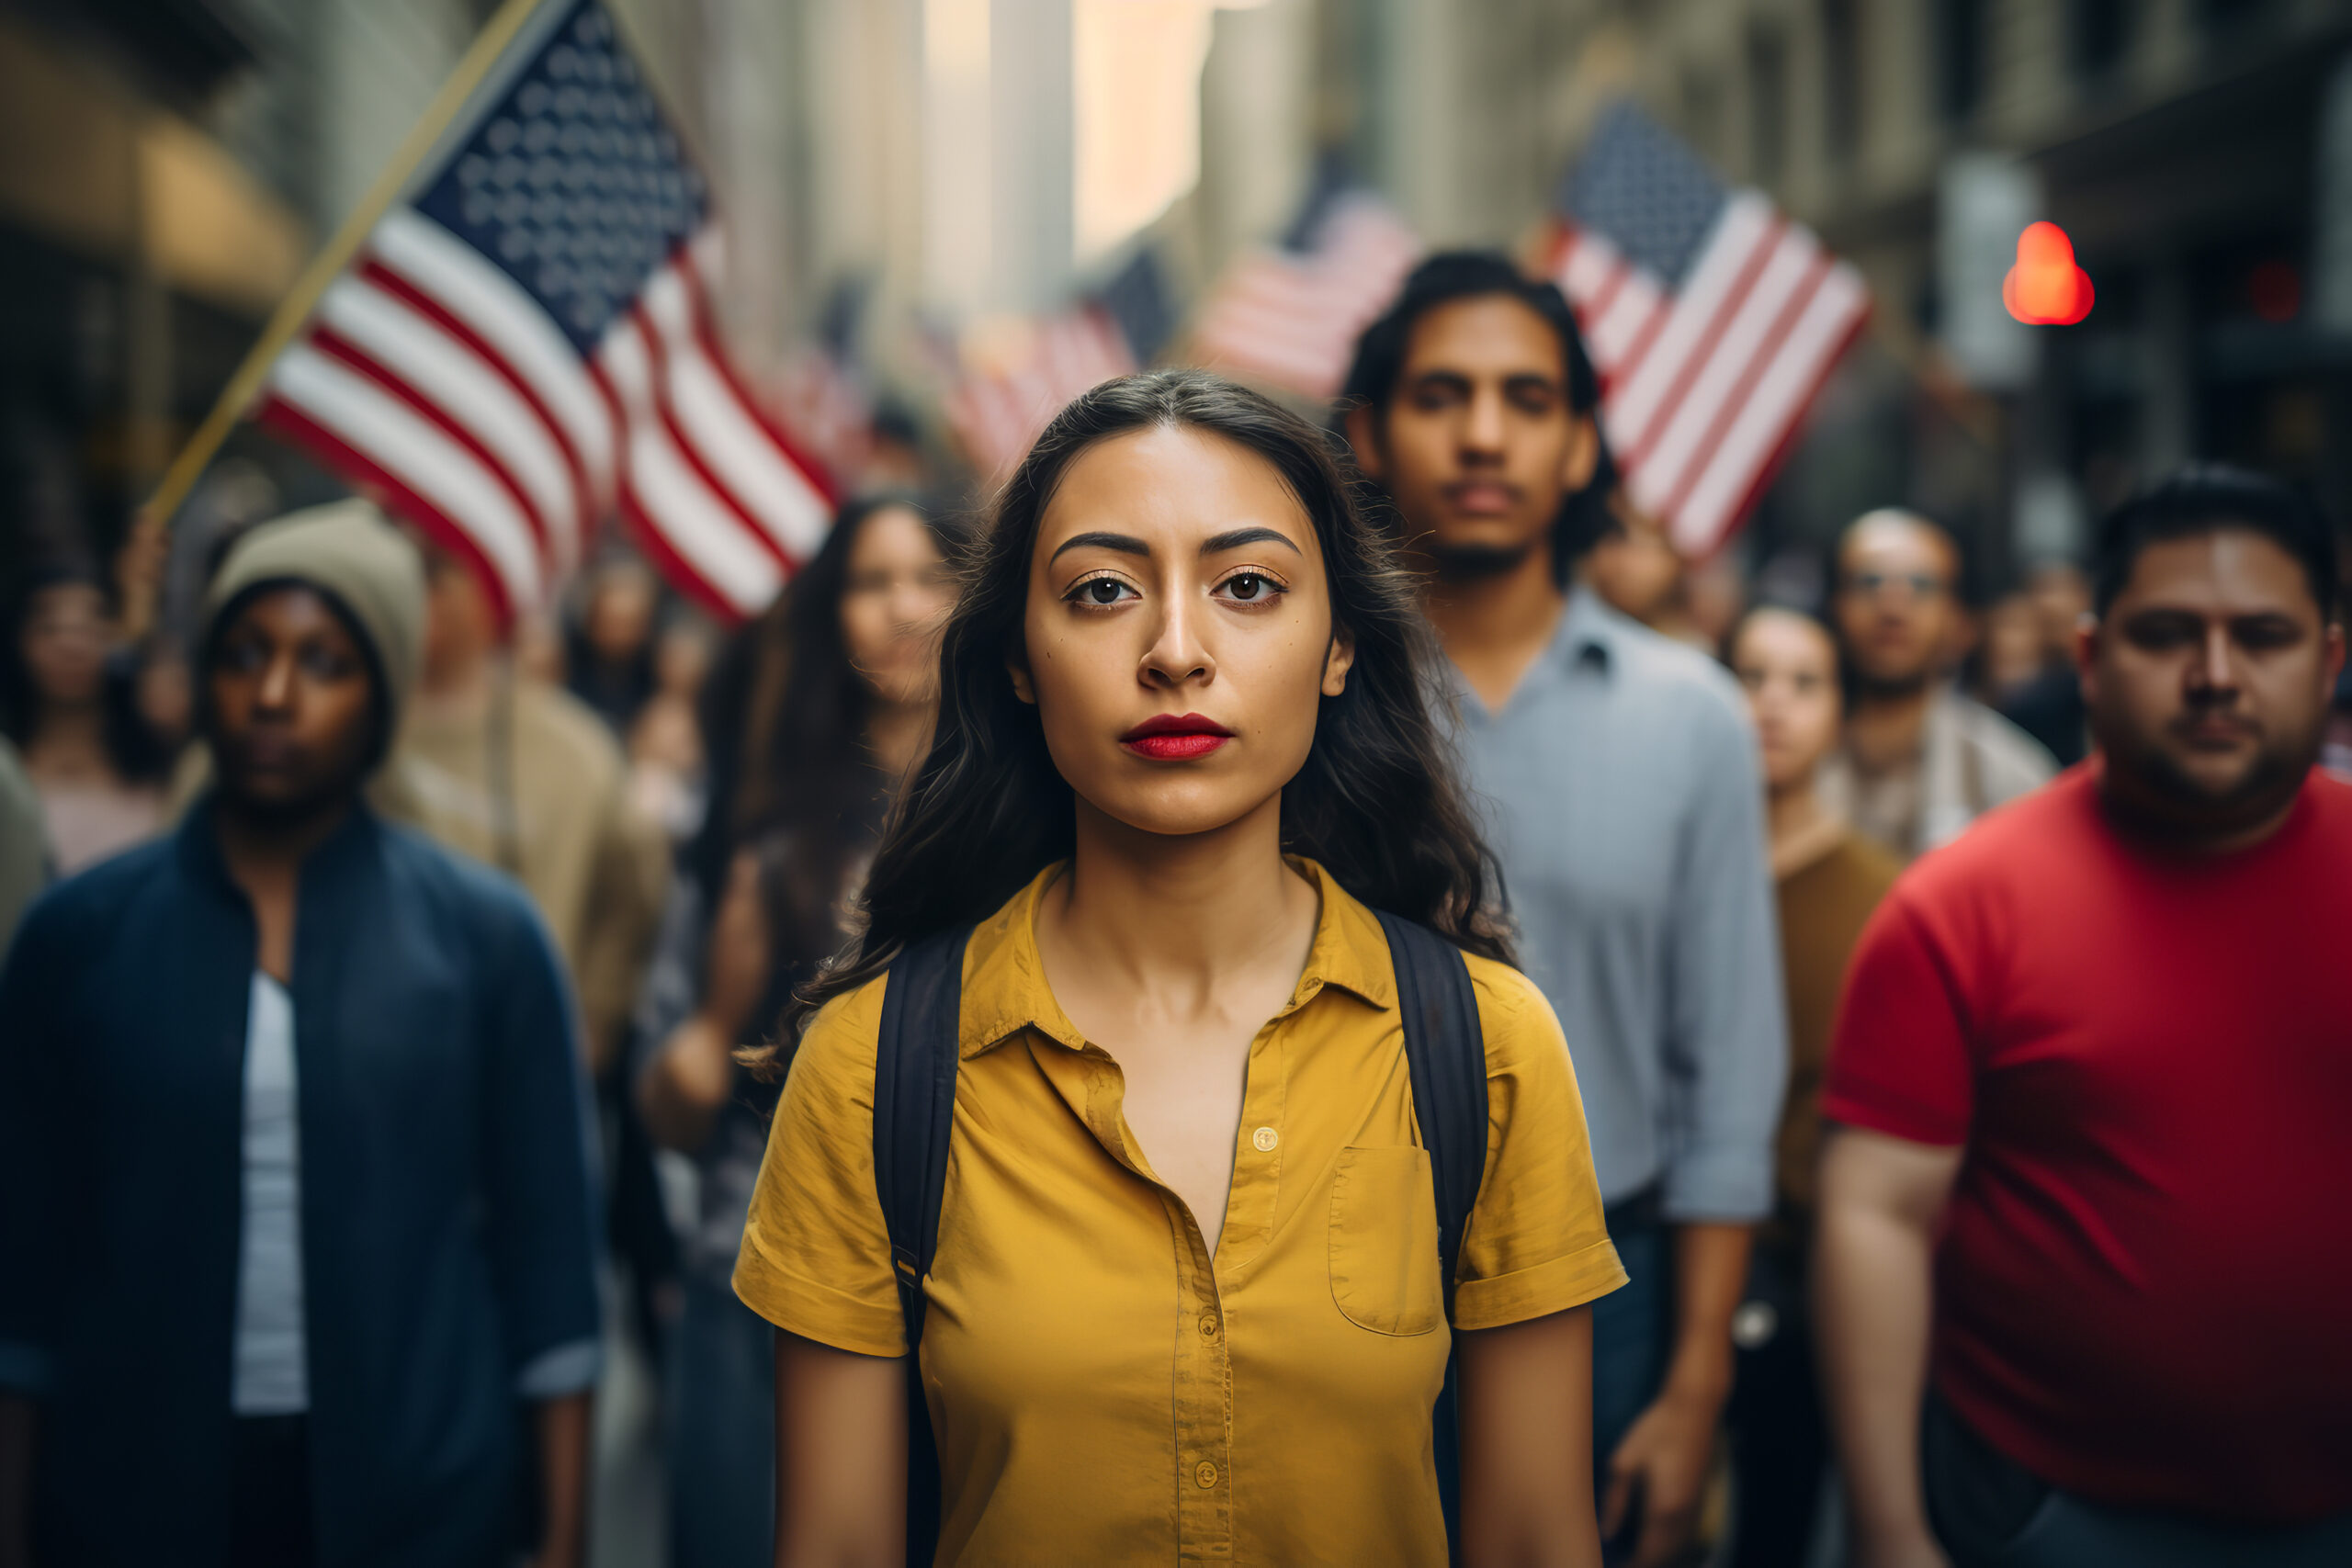 Young woman in front of a group of persons, some holding the American flag